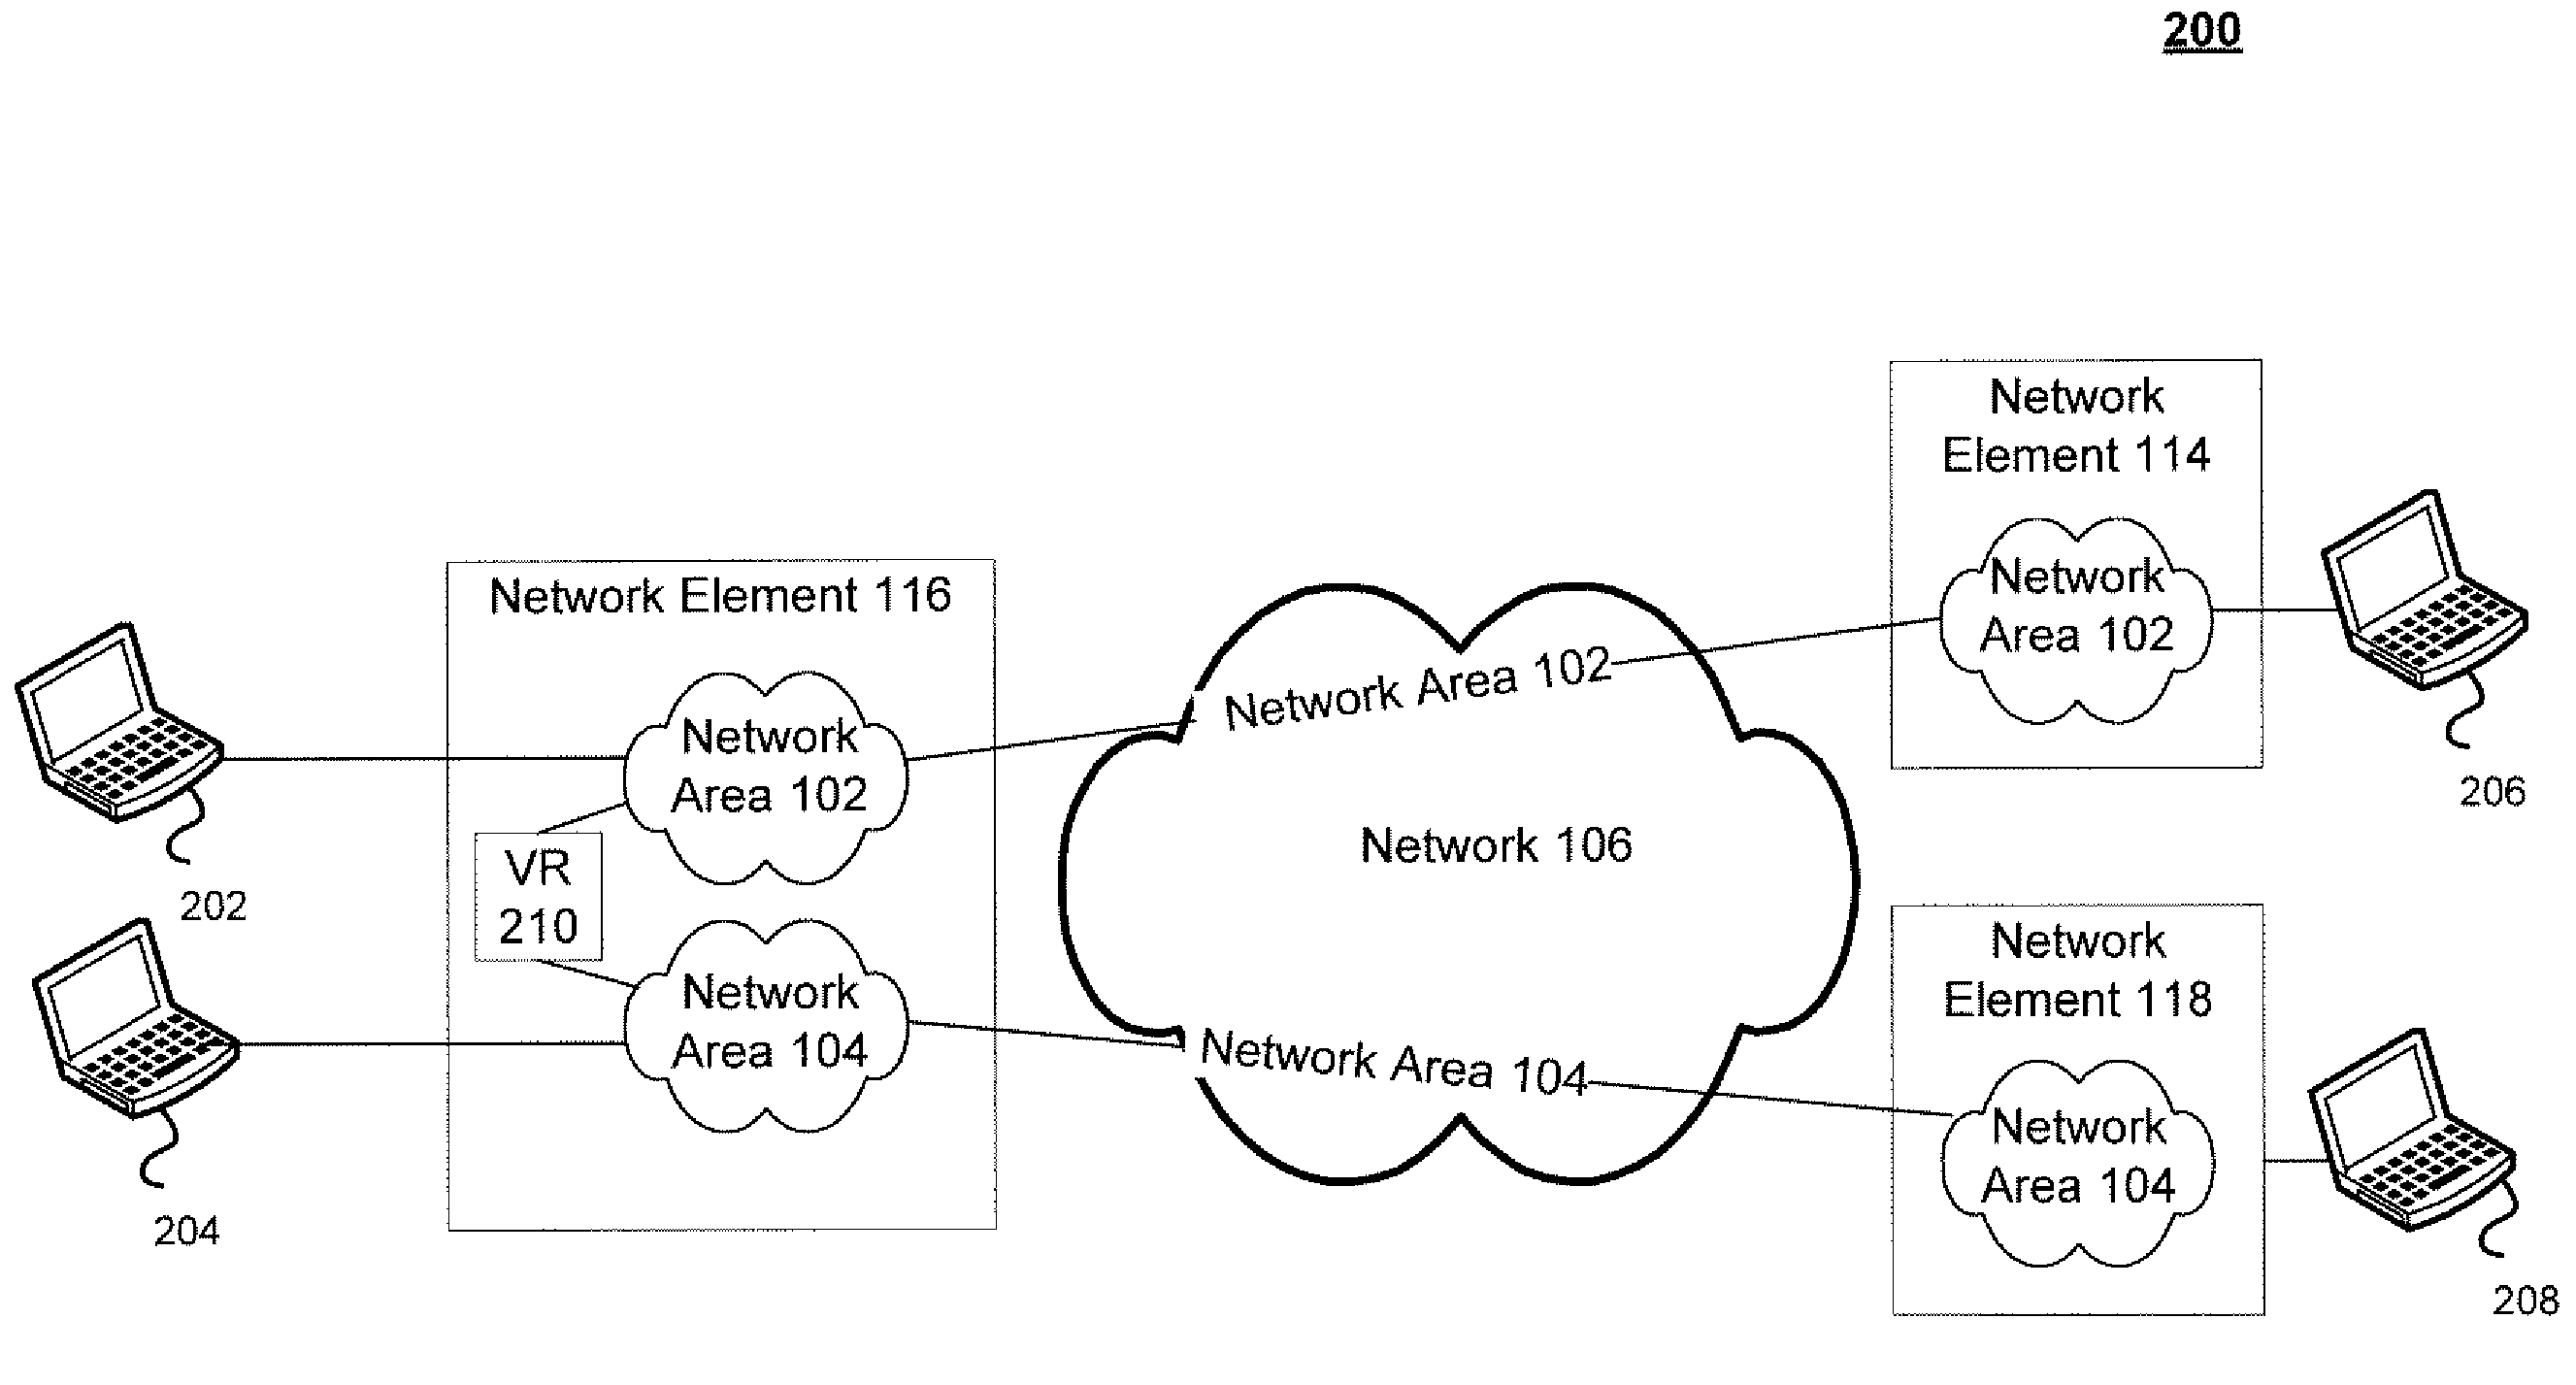 Techniques for routing data between network areas